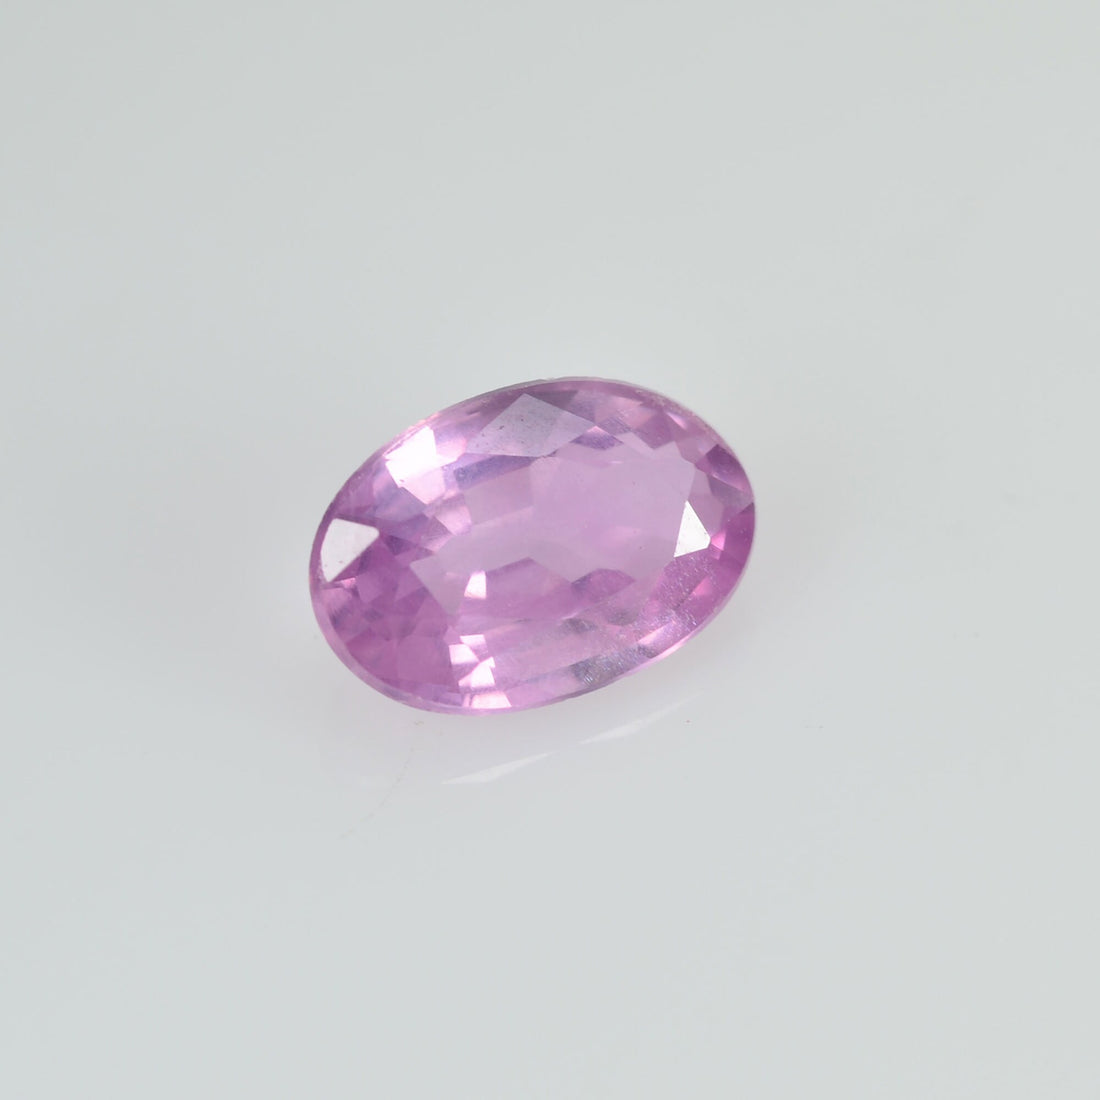 0.52 cts Natural Pink Sapphire Loose Gemstone oval Cut